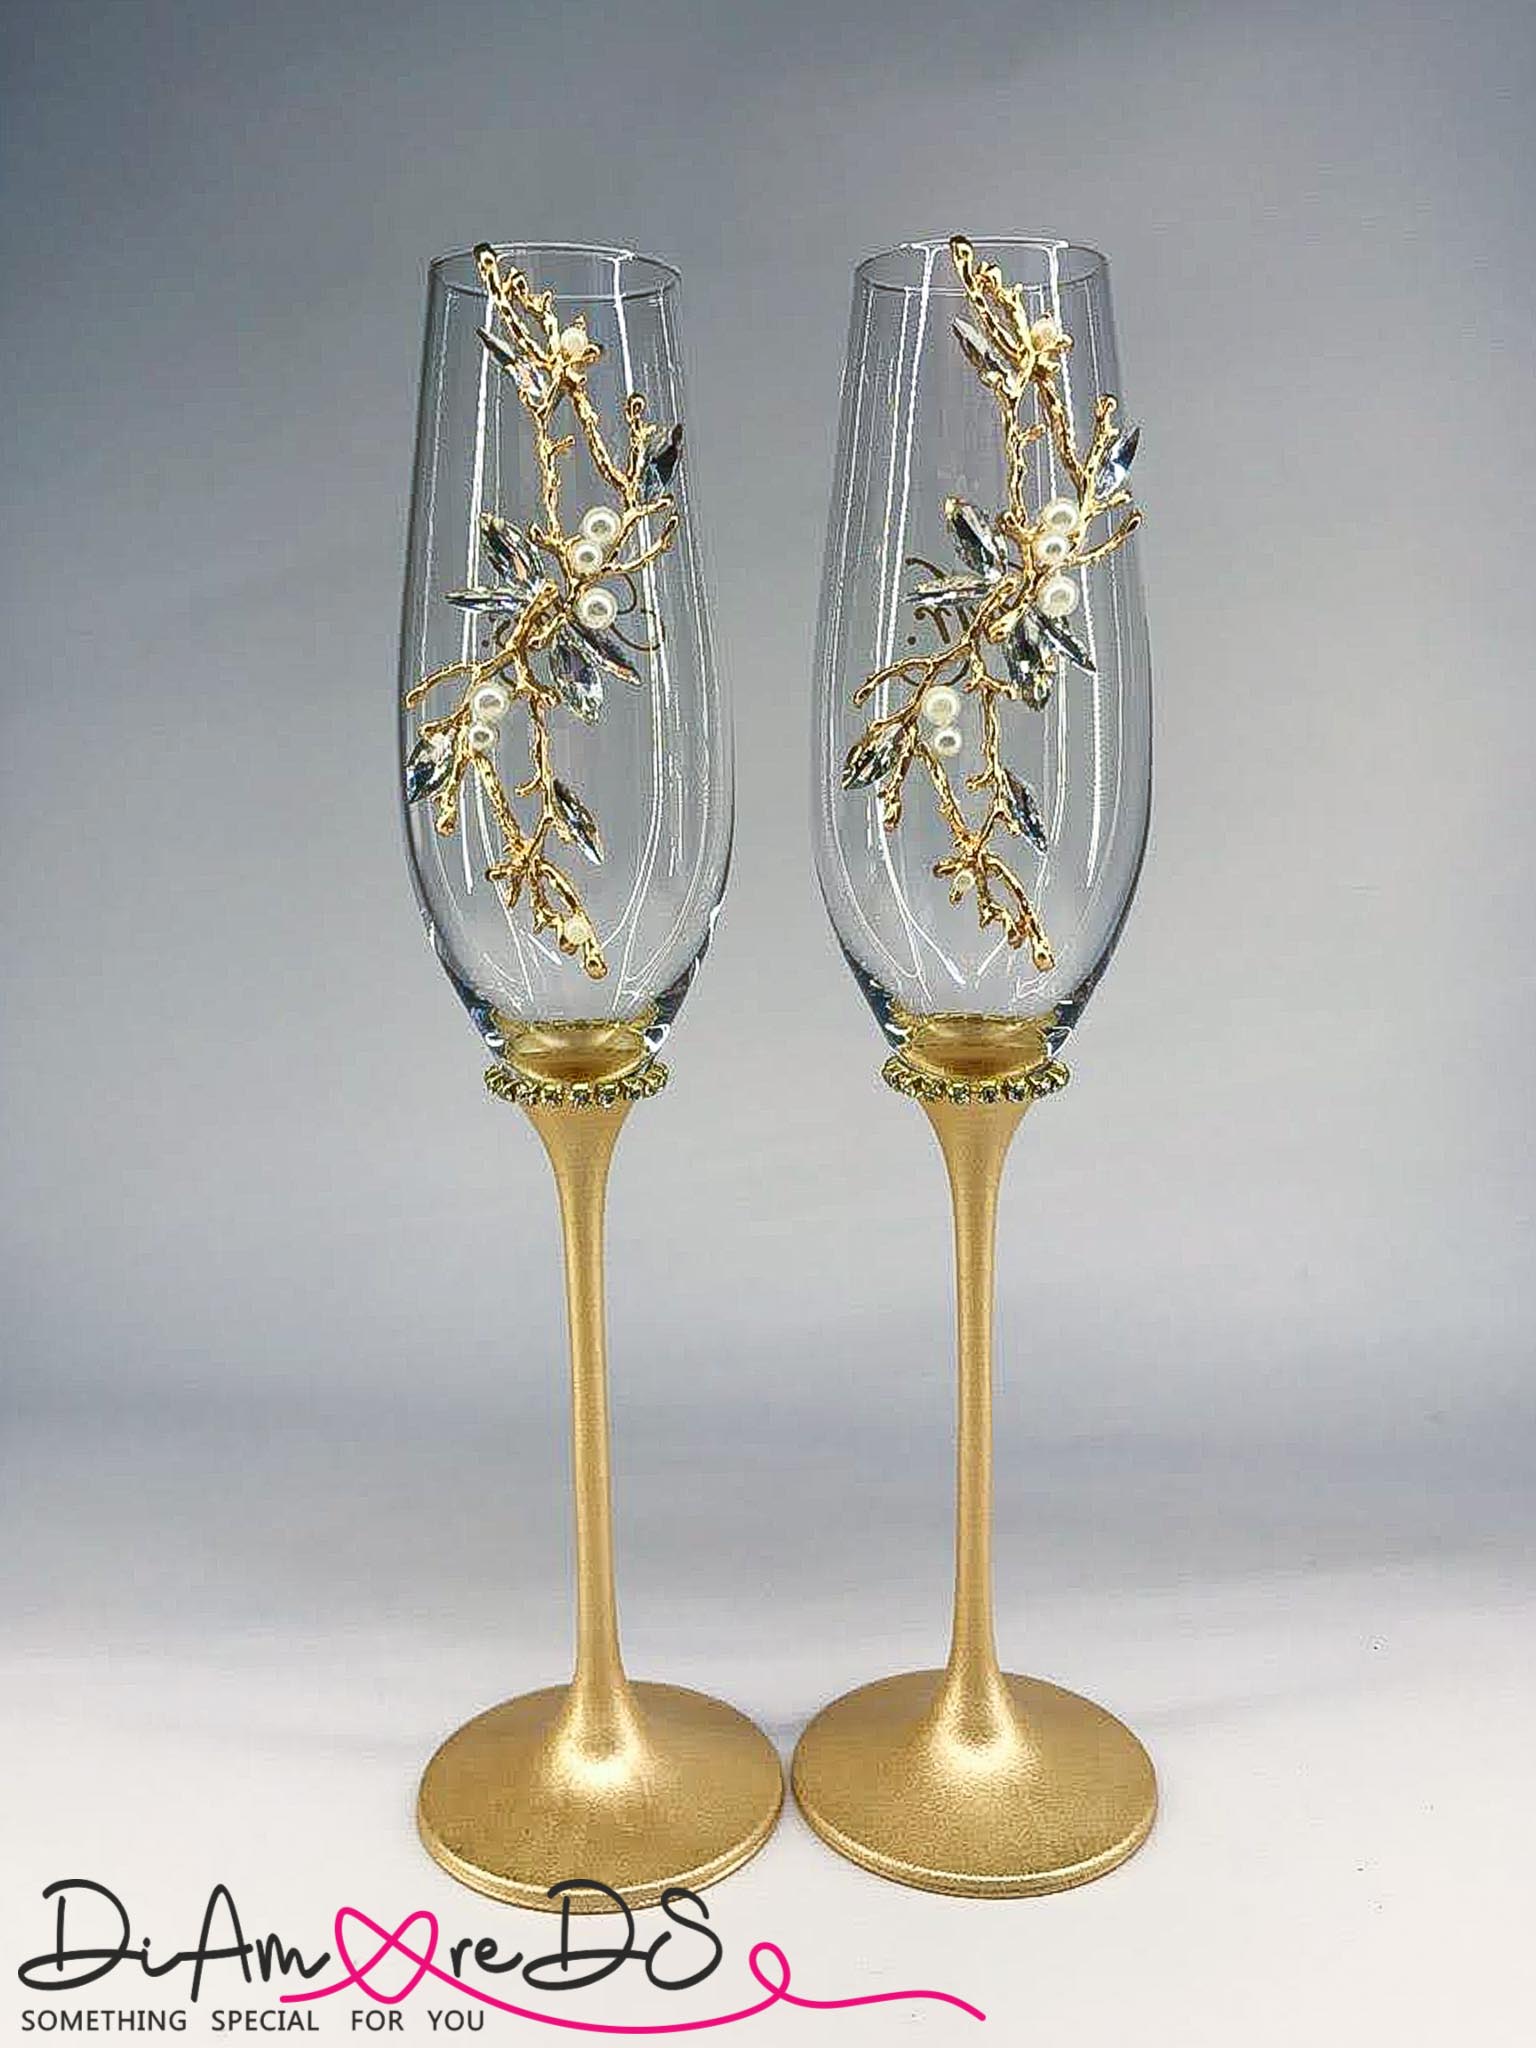 Luxury champagne flutes with gold accents